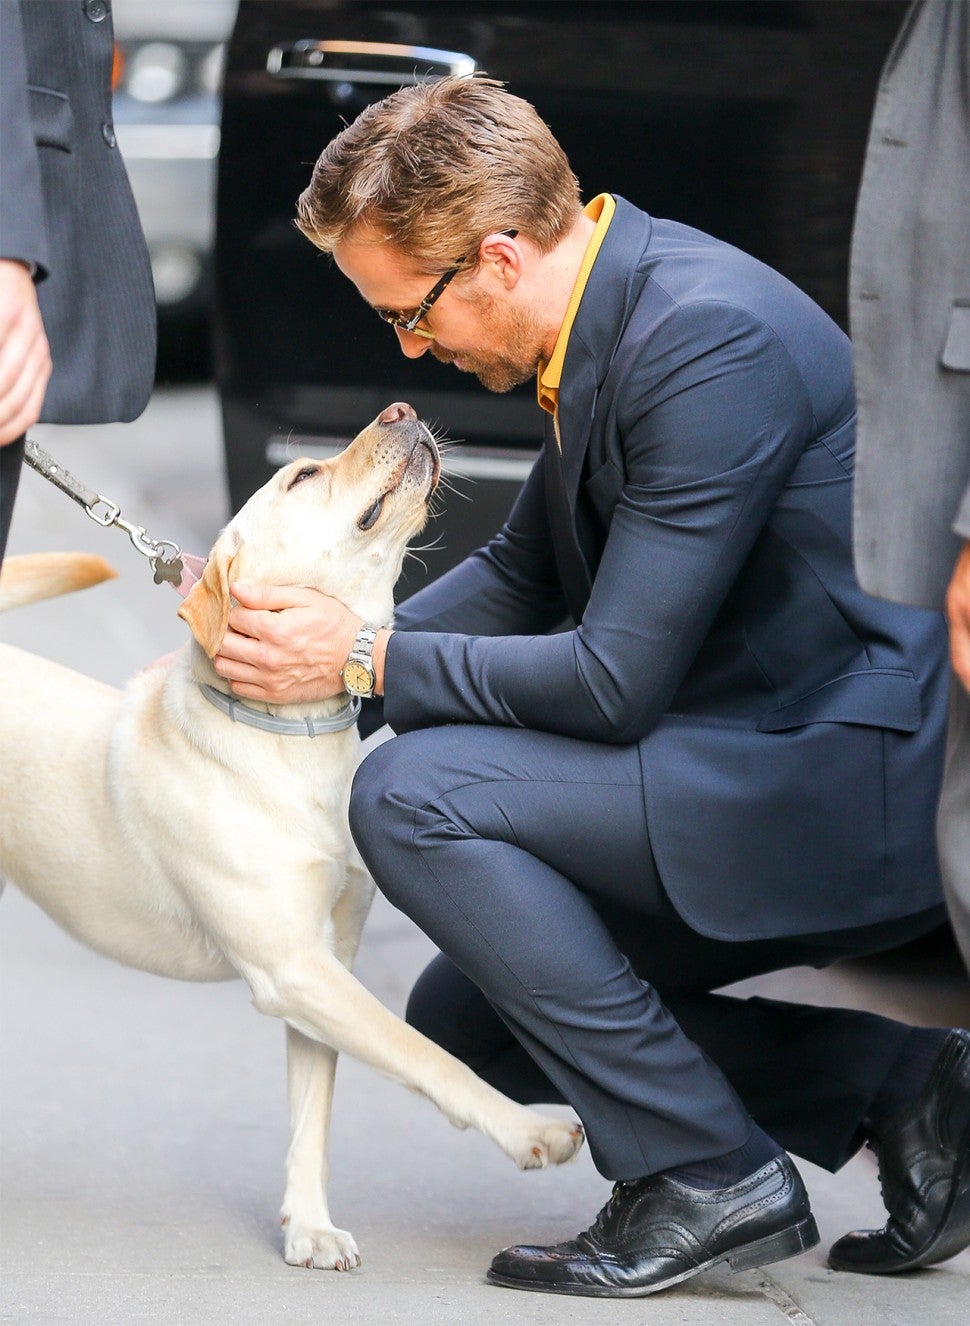 This Dog Met Ryan Gosling and Had the Exact Same Reaction You Would